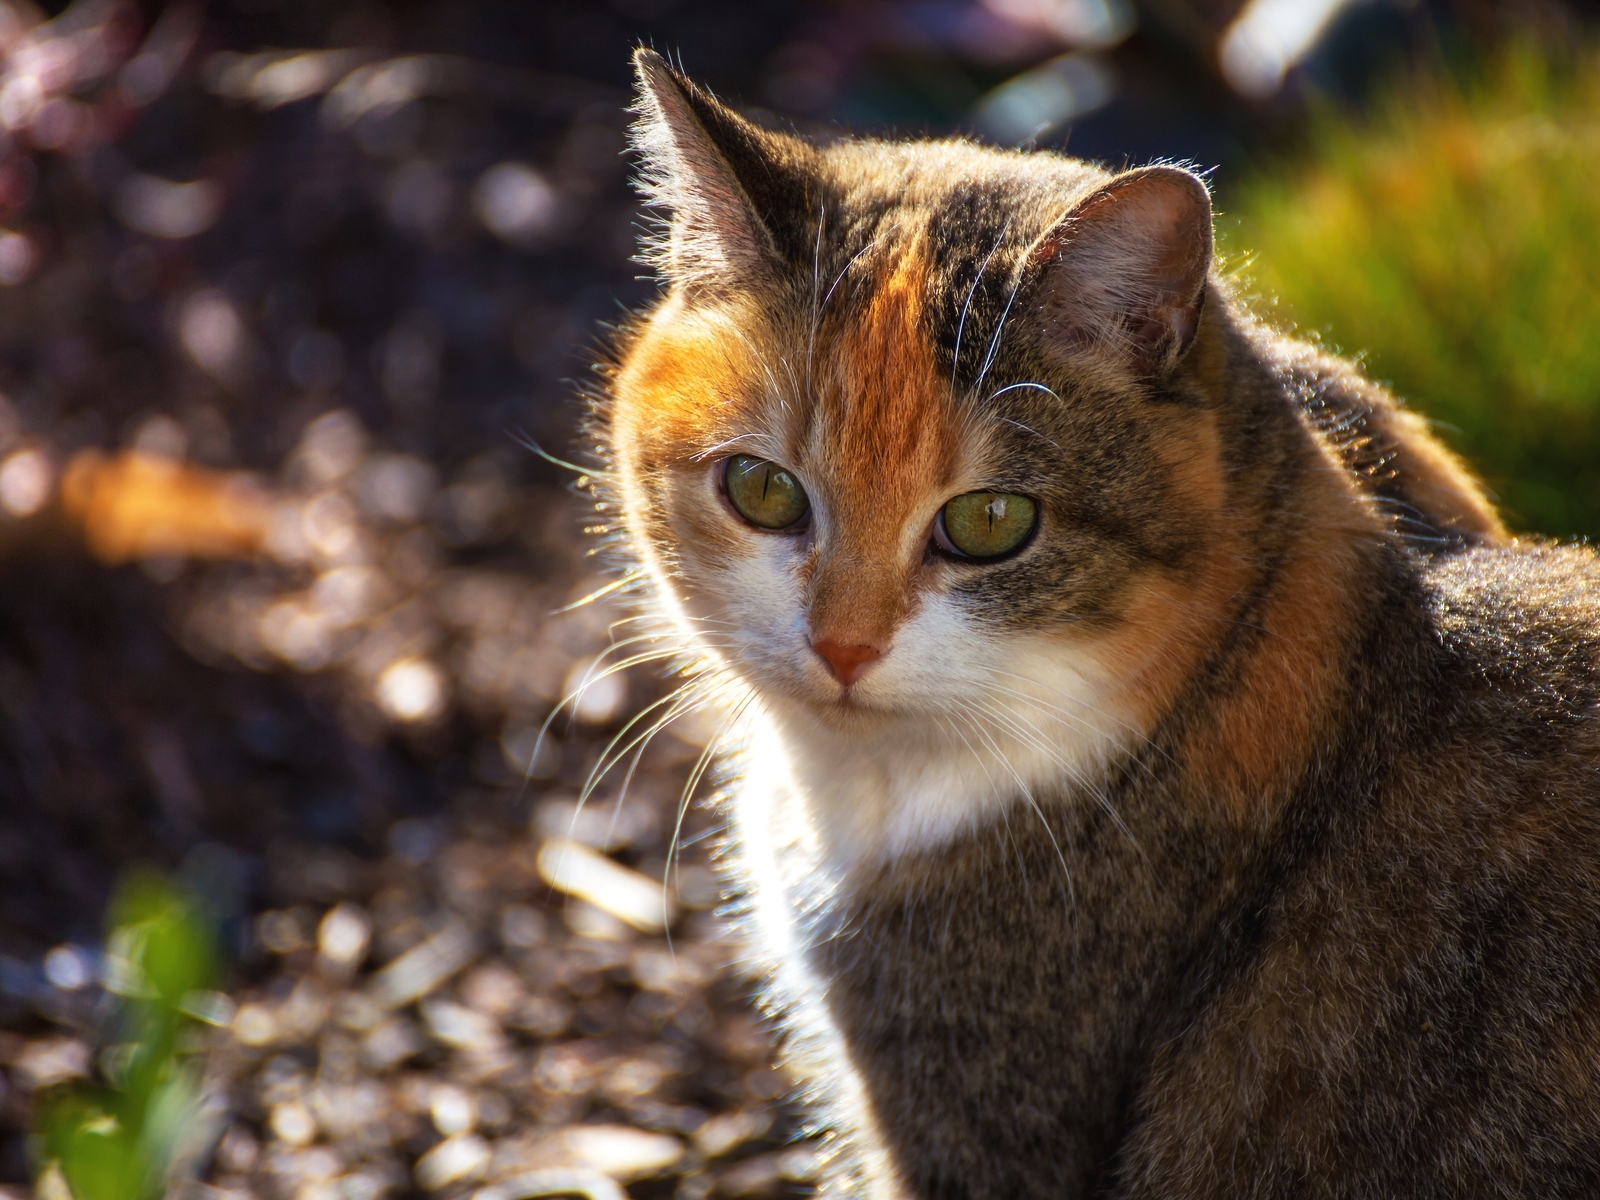 Image: Kitty, cat, tri-color, colorful, face, green, eyes, rays sun, basking